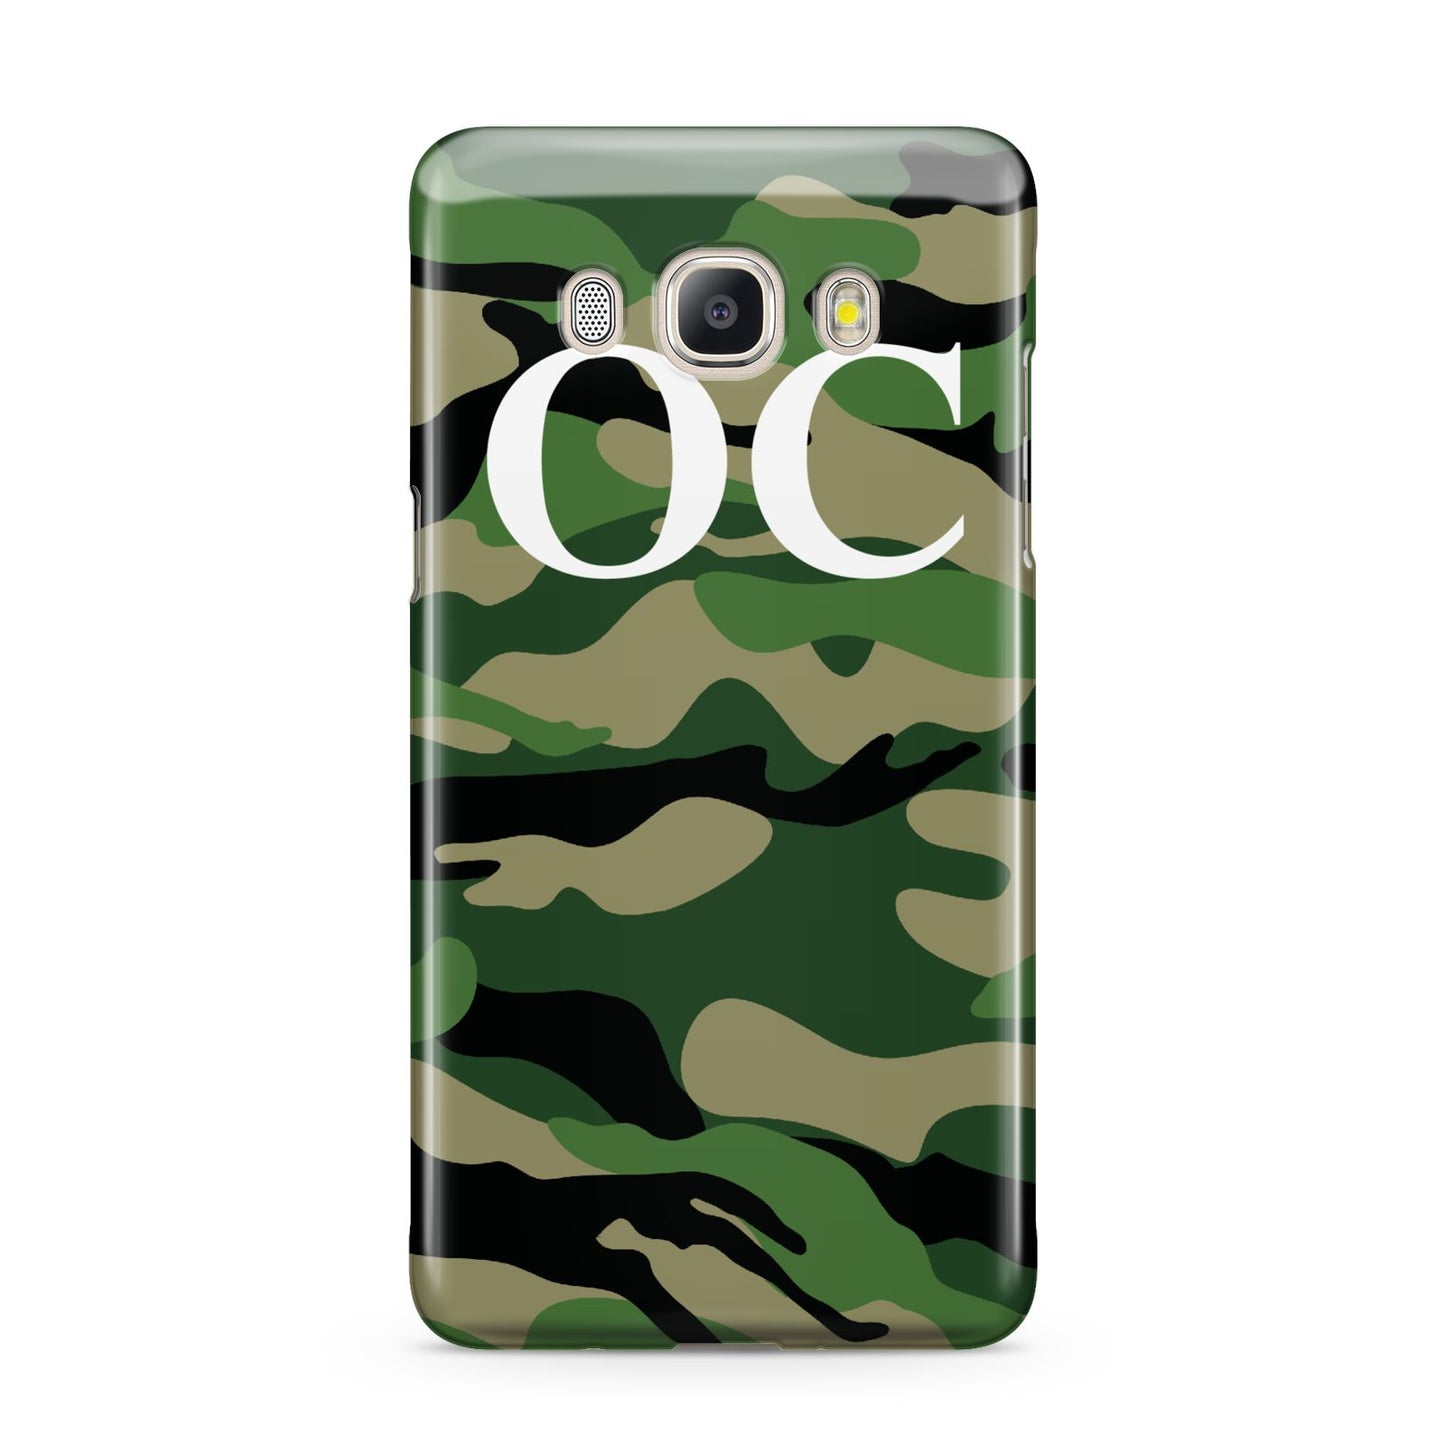 Personalised Camouflage Samsung Galaxy J5 2016 Case